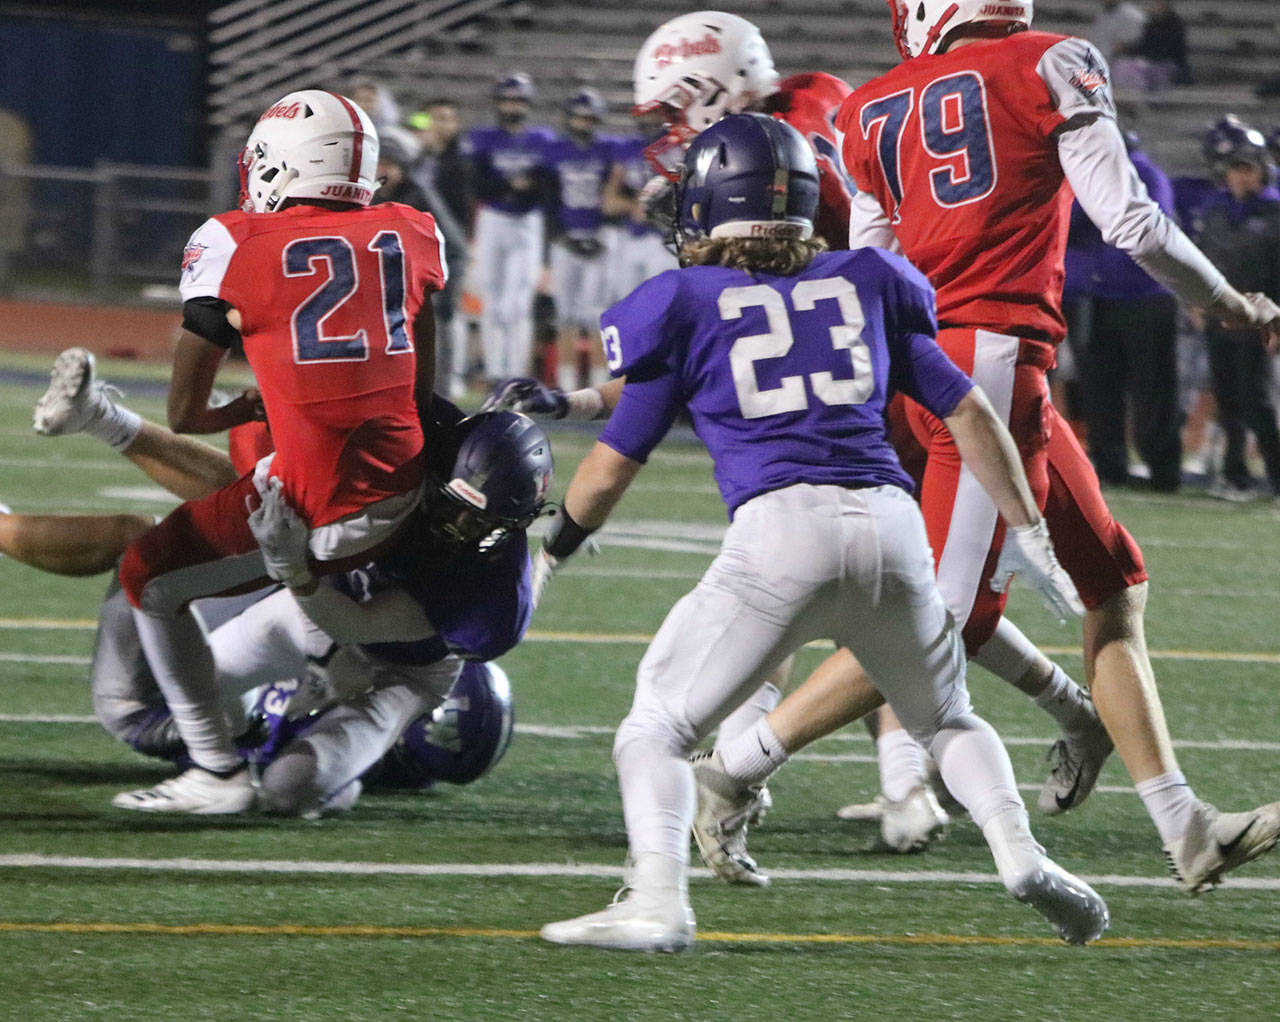 Juanita’s Brayden Brown backs into the end zone for a touchdown. Andy Nystrom/ staff photo